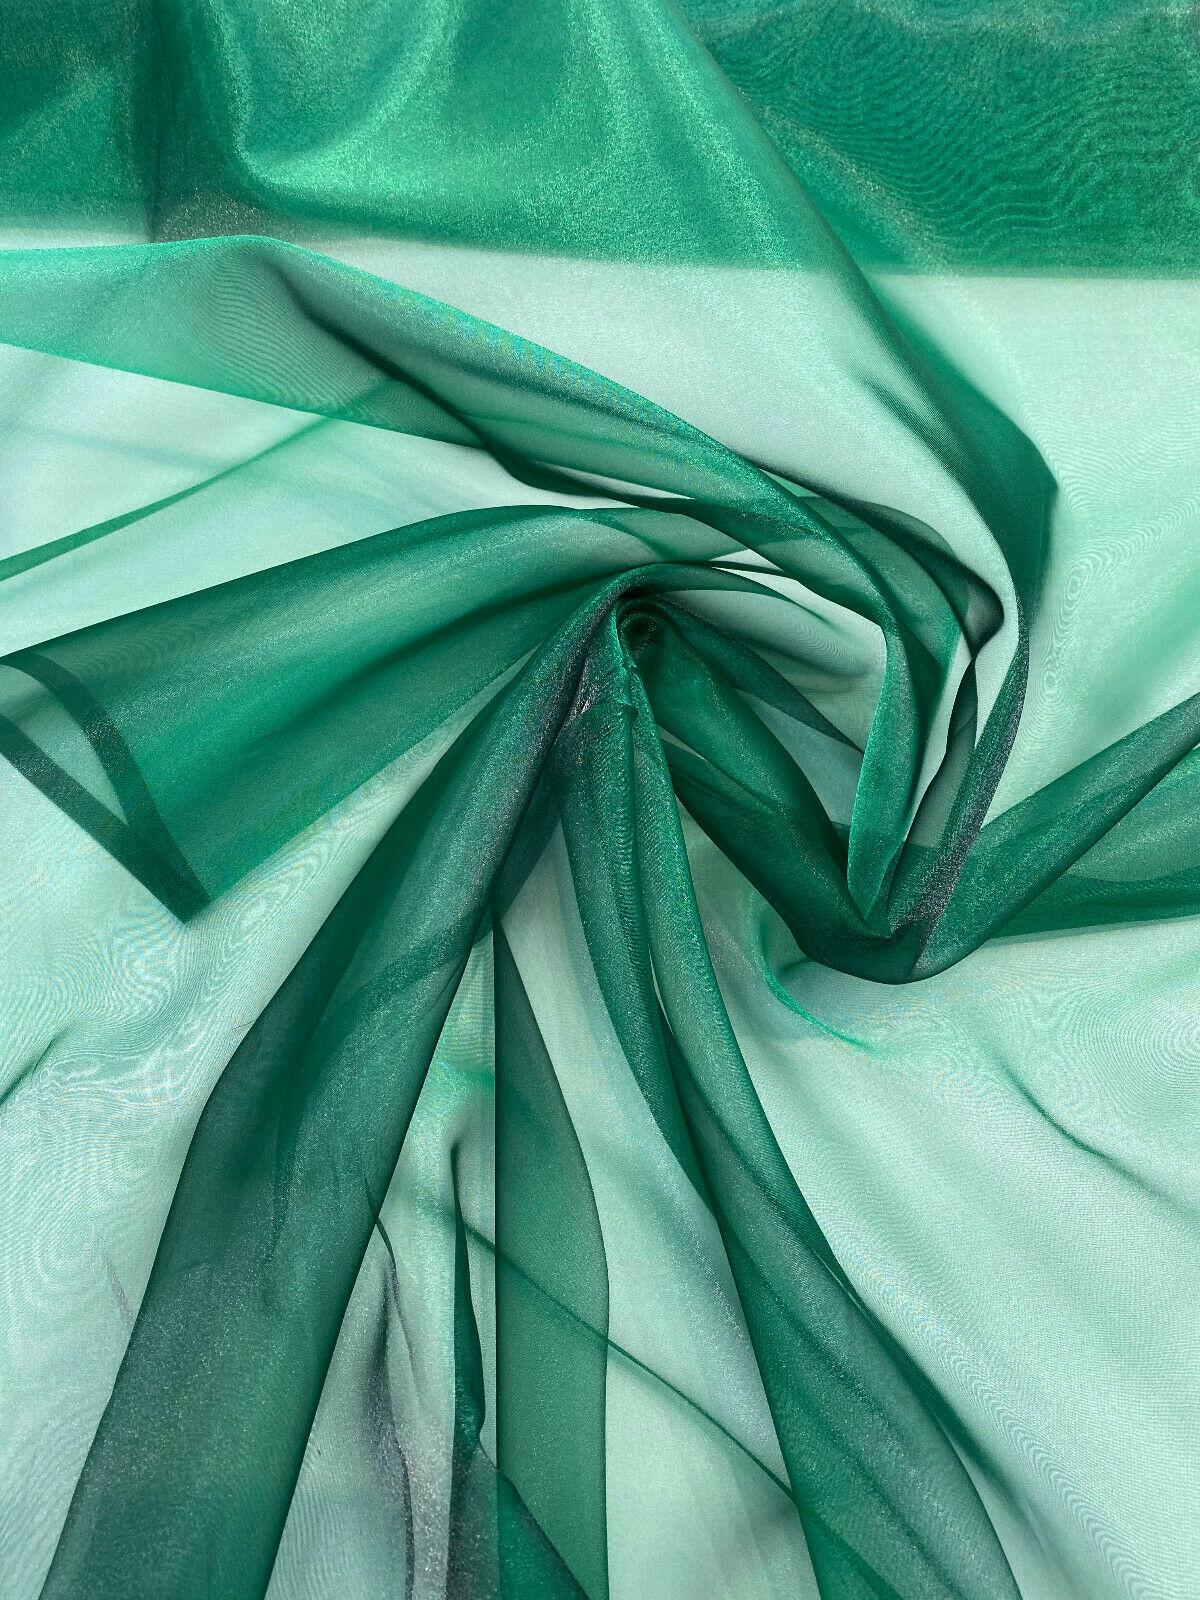 French Green 120 Inch Organza Double Width Fabric By The yard – Affordable  Home Fabrics